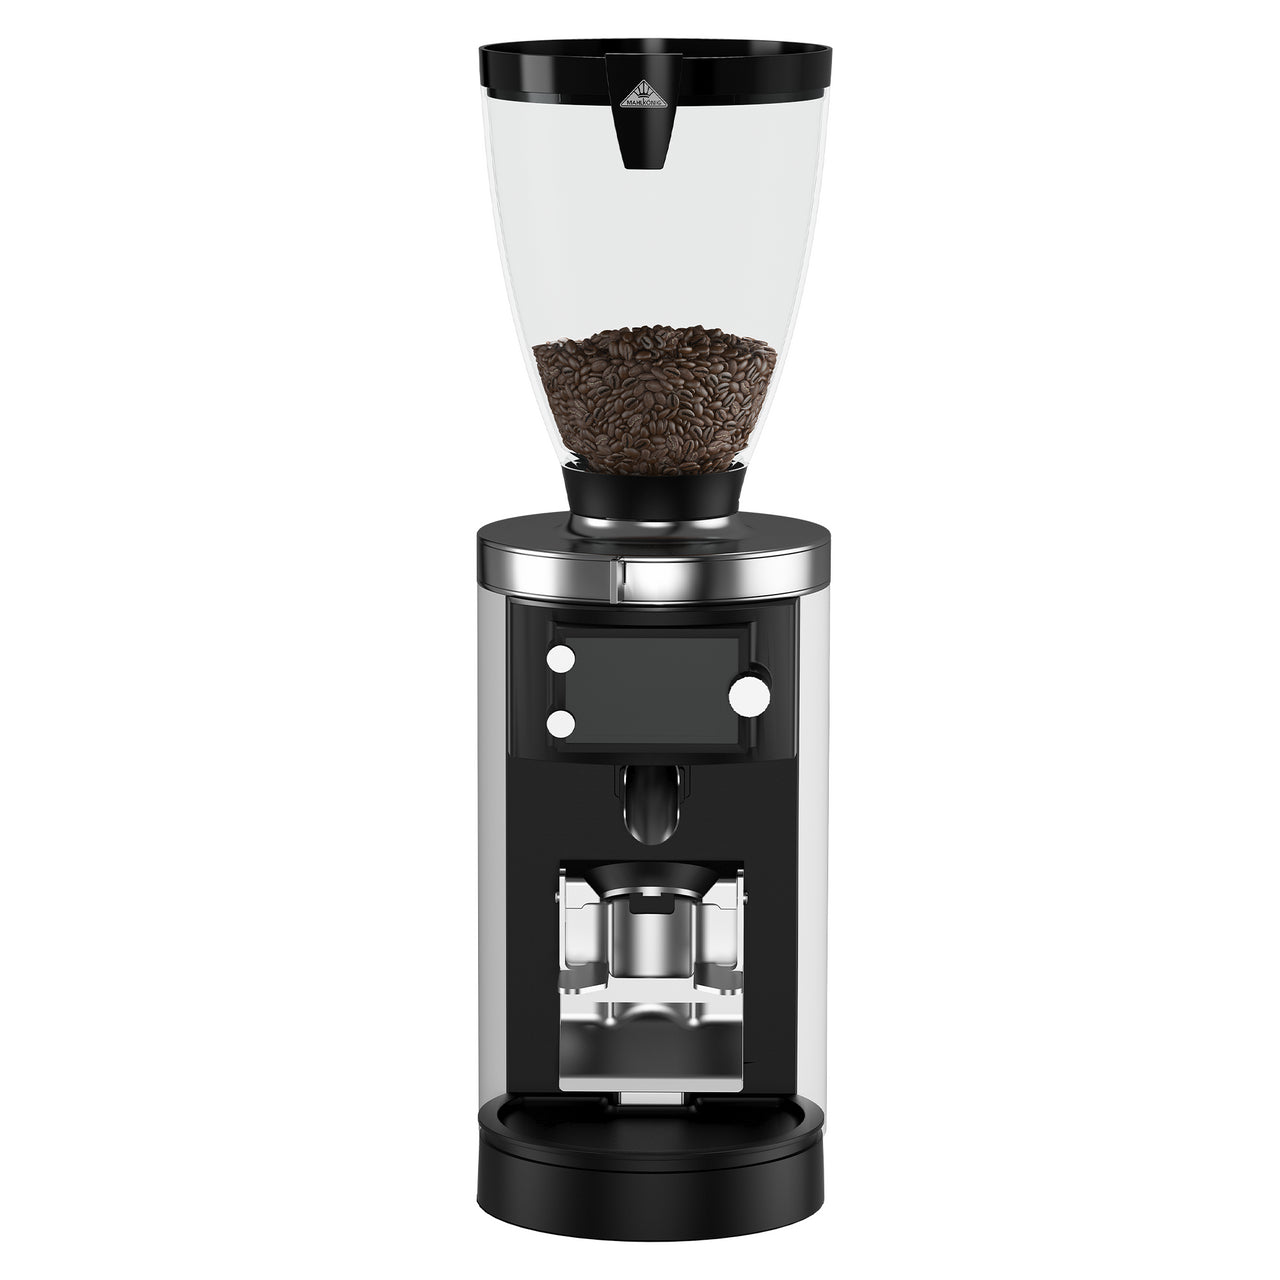 Mahlkonig Coffee Grinder E65S GBW - Grind By Weight